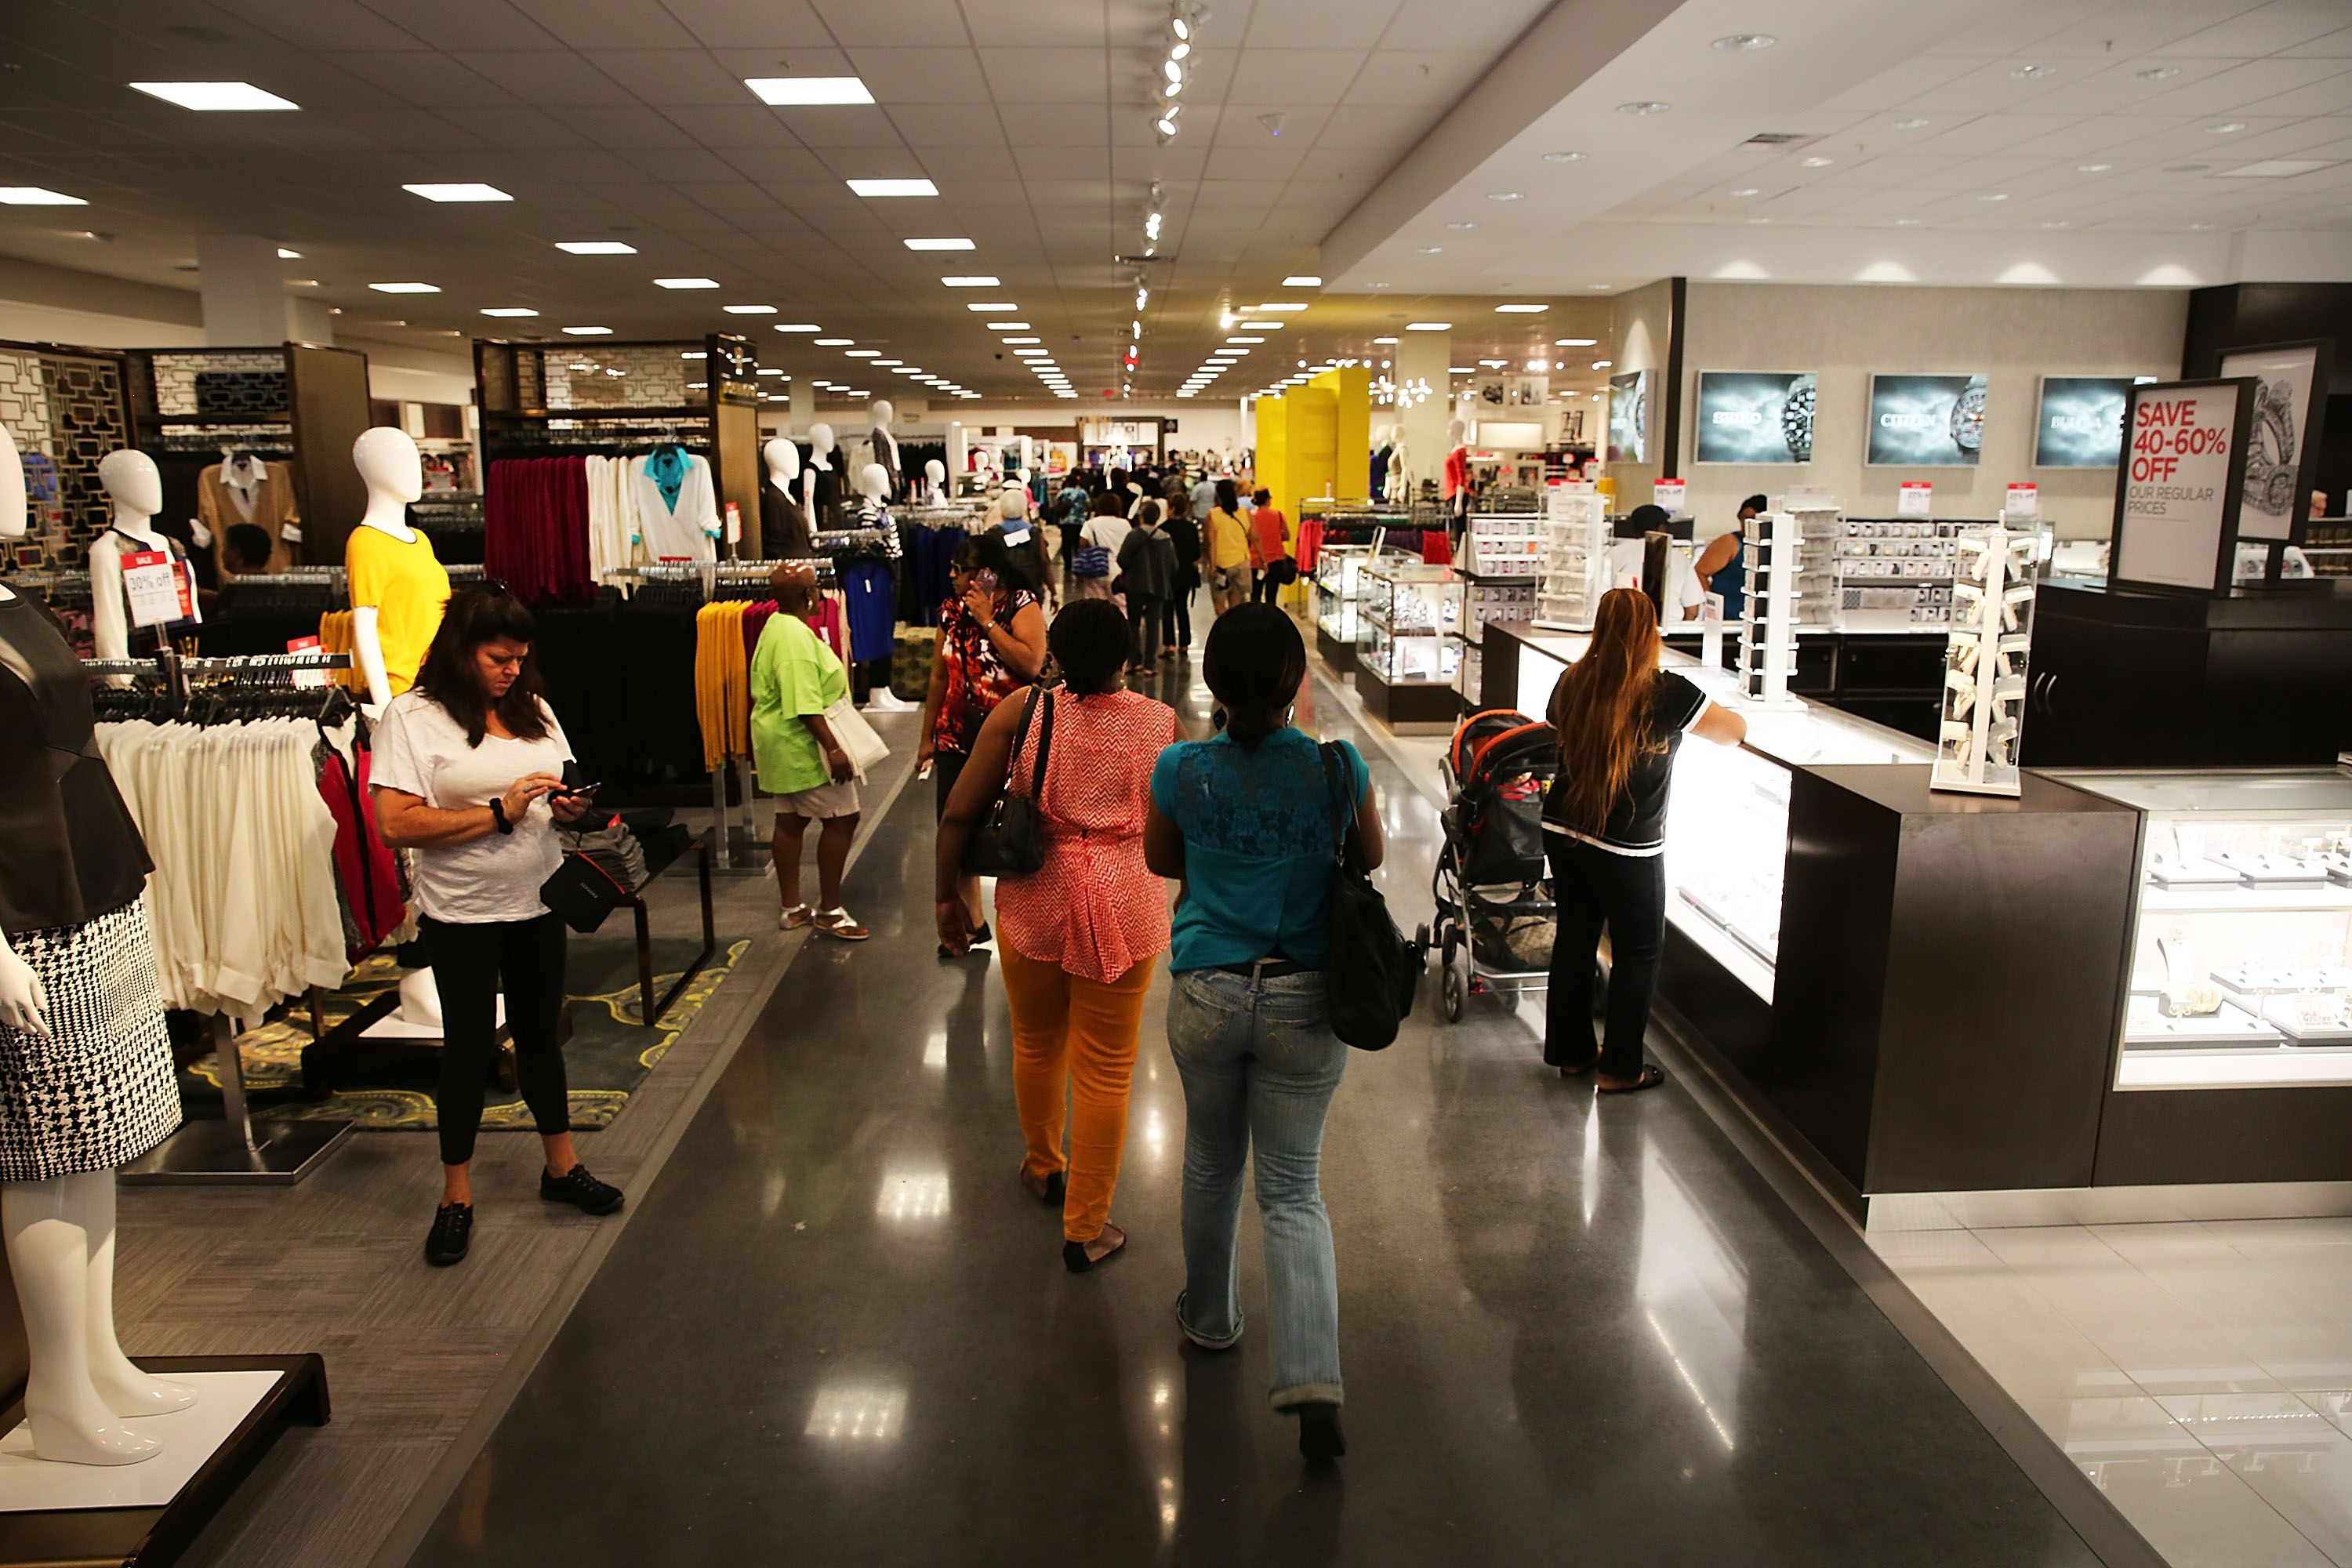 Jc Penney Opens New Store In Brooklyn 454334776 59149d025f9b586470e405be 